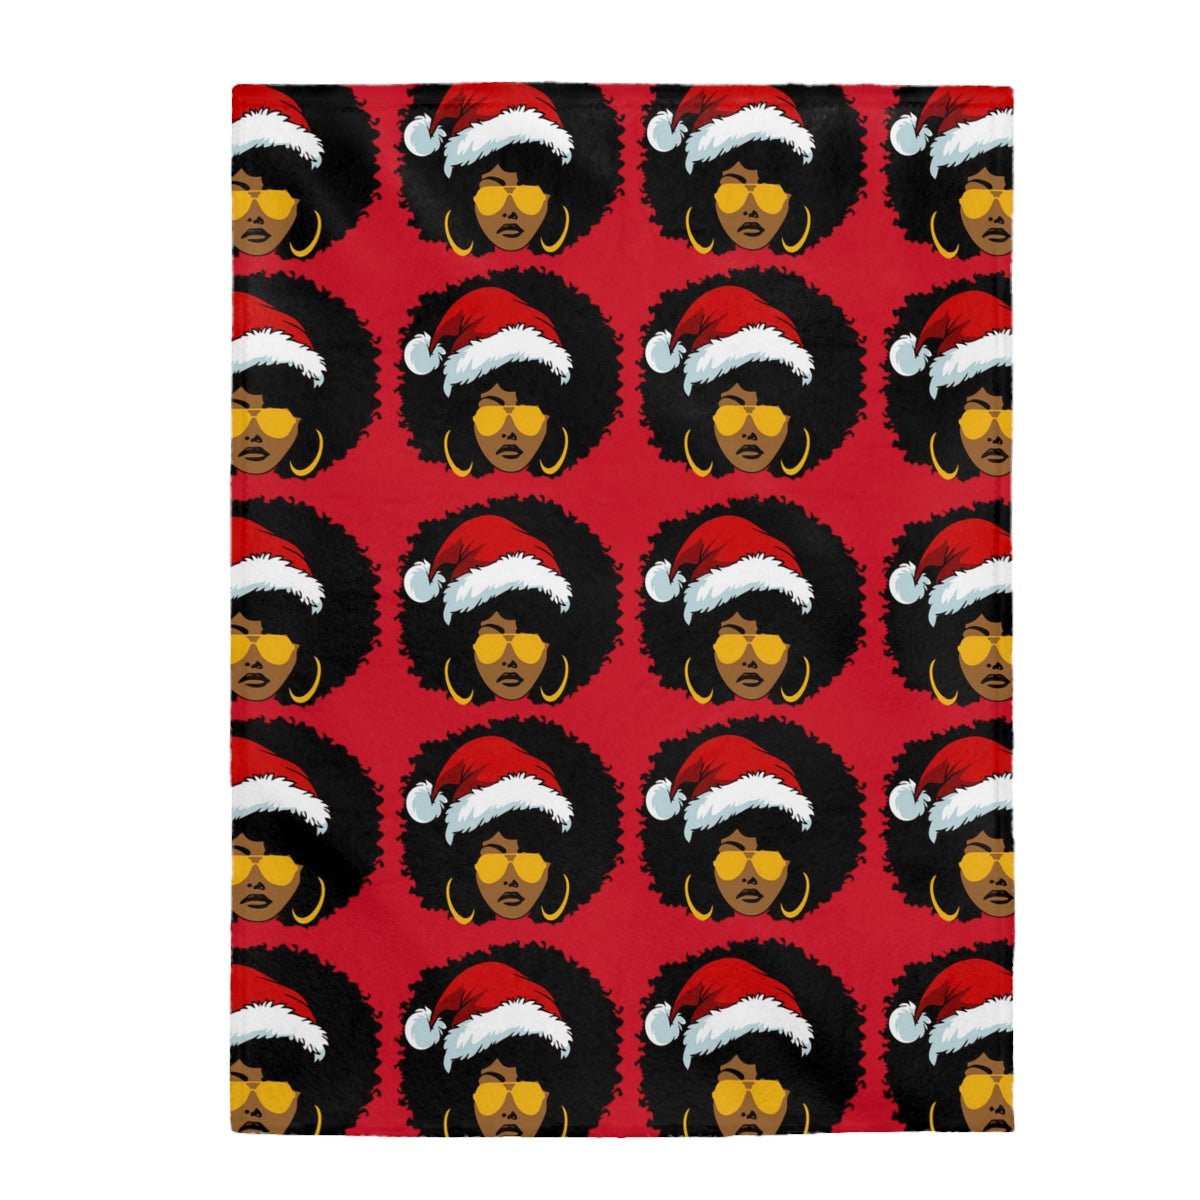 Mrs. Afro Claus Blanket - The Trini Gee